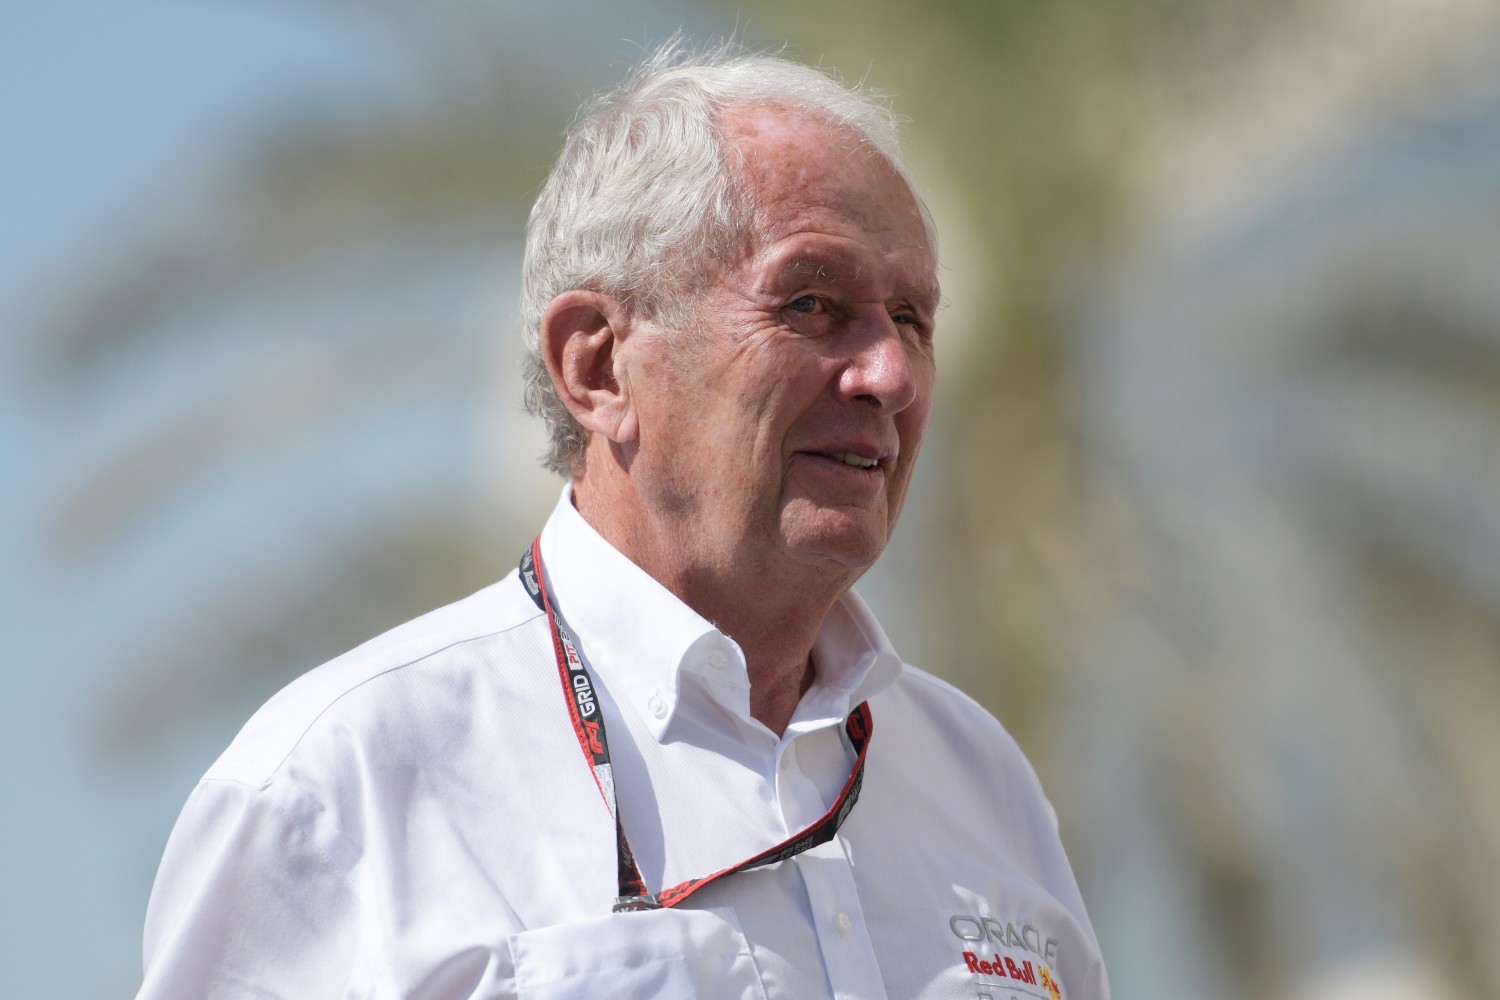 Red Bull Racing Team Consultant Dr Helmut Marko walks in the paddock prior to practice ahead of the F1 Grand Prix of Abu Dhabi at Yas Marina Circuit on November 18, 2022 in Abu Dhabi, United Arab Emirates. (Photo by Rudy Carezzevoli/Getty Images) // Getty Images / Red Bull Content Pool